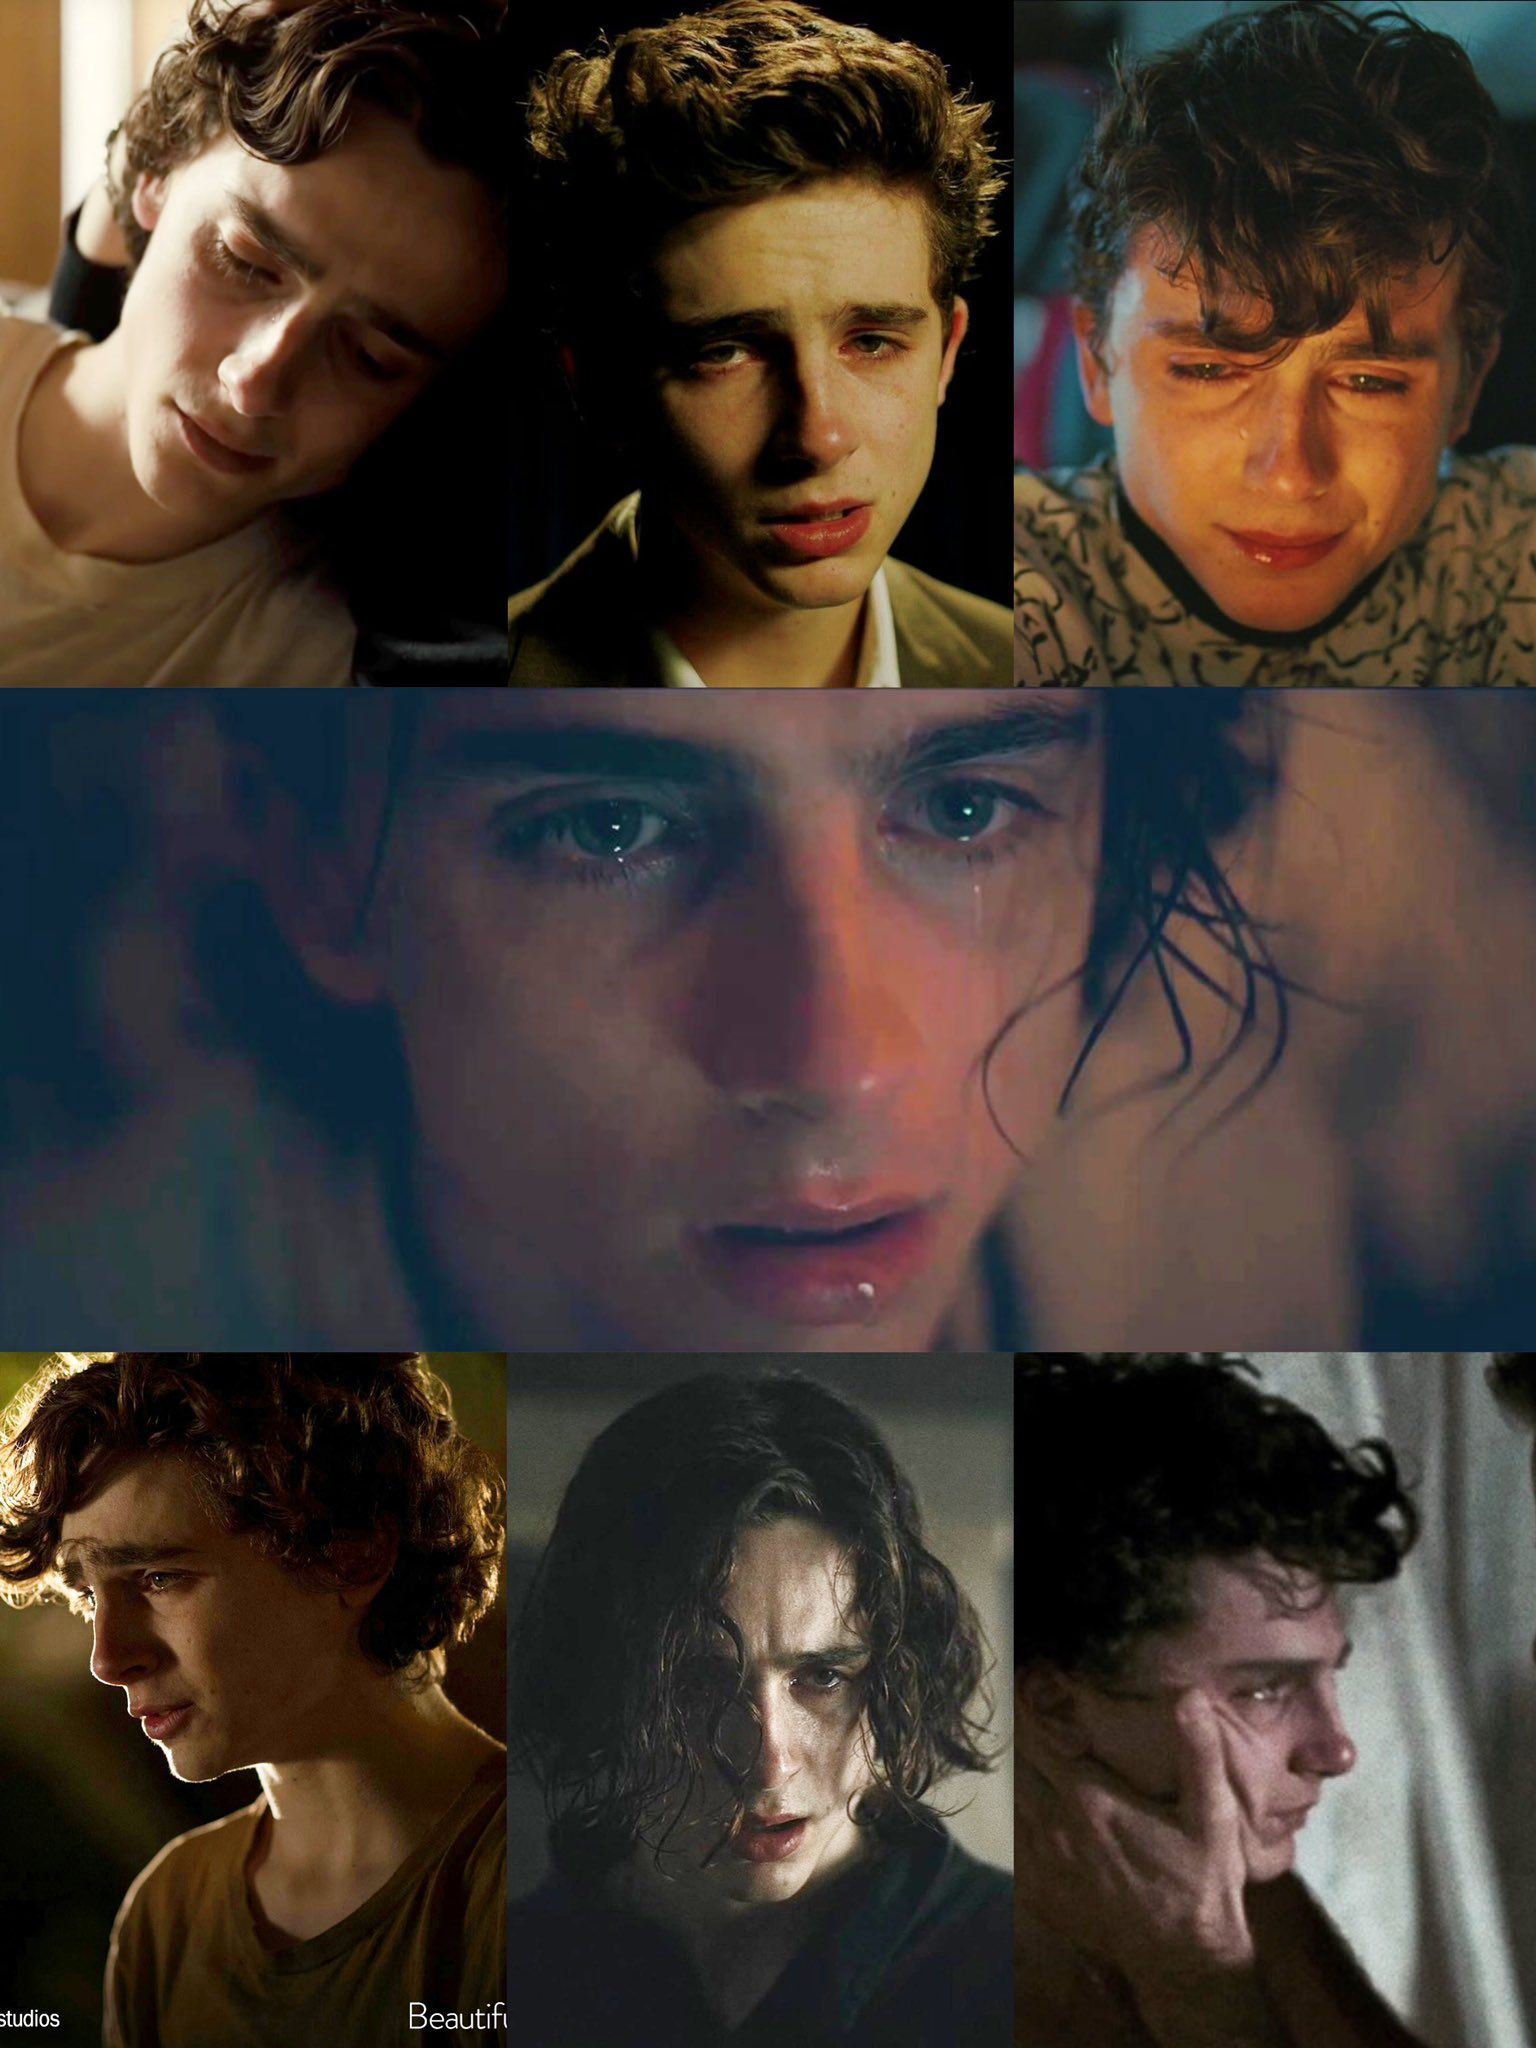 musettaée chalamet dailyée chalamet crying in movies. that's it. that's the tweet